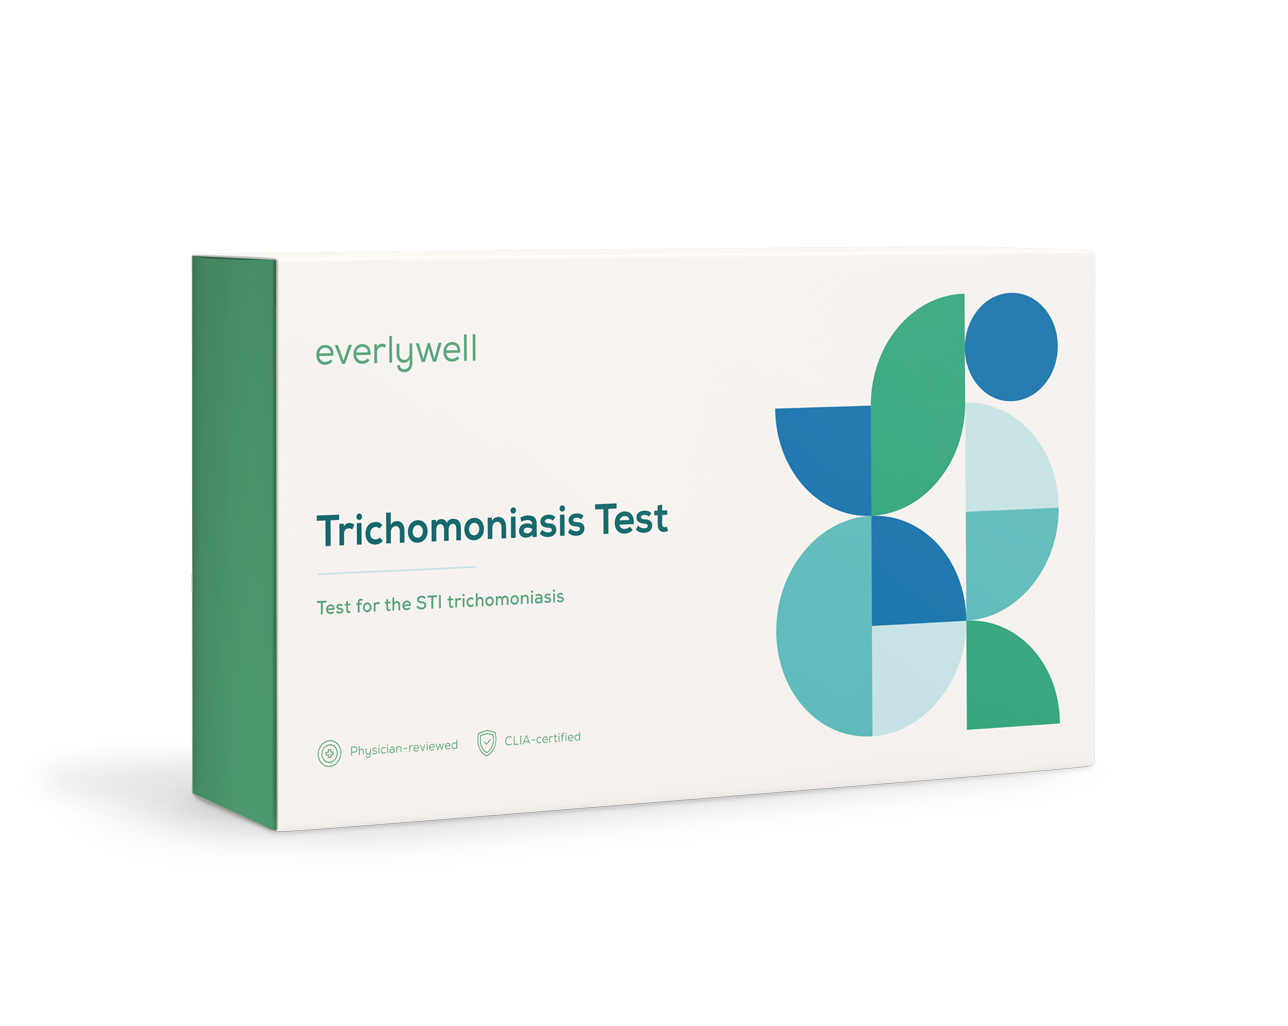 Testosterone Test, Confidential At Home Lab Results, Results Online